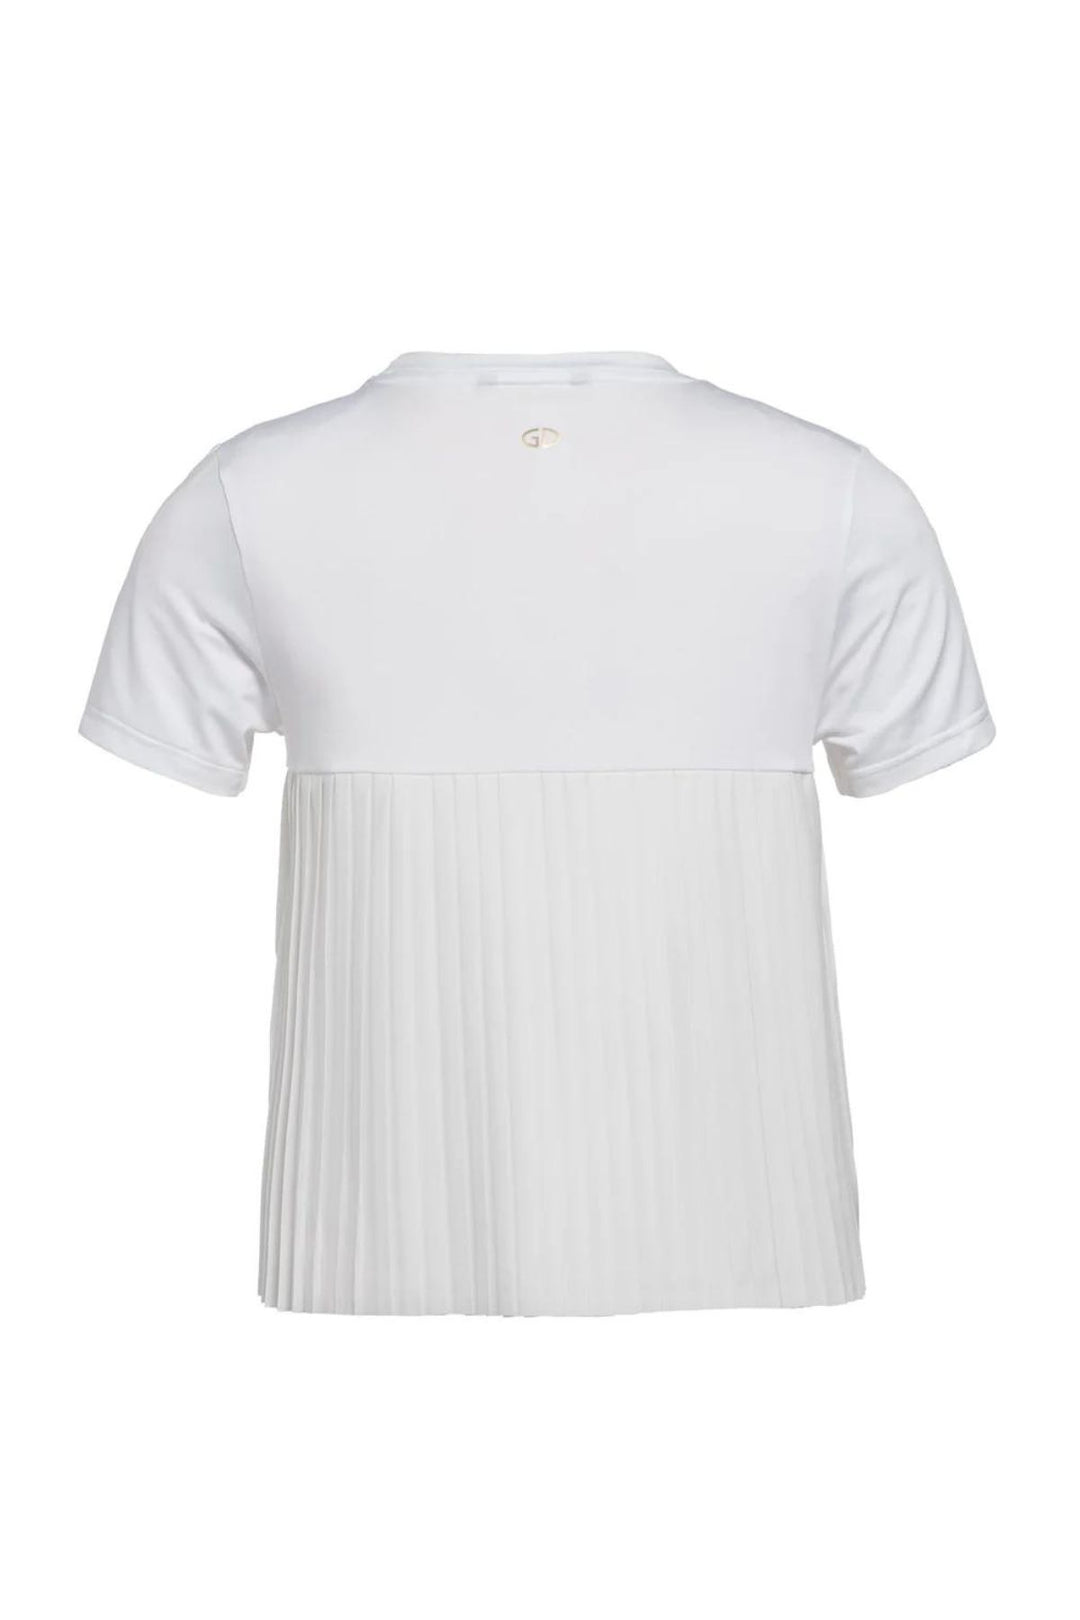 GROOVE short sleeve top (White)